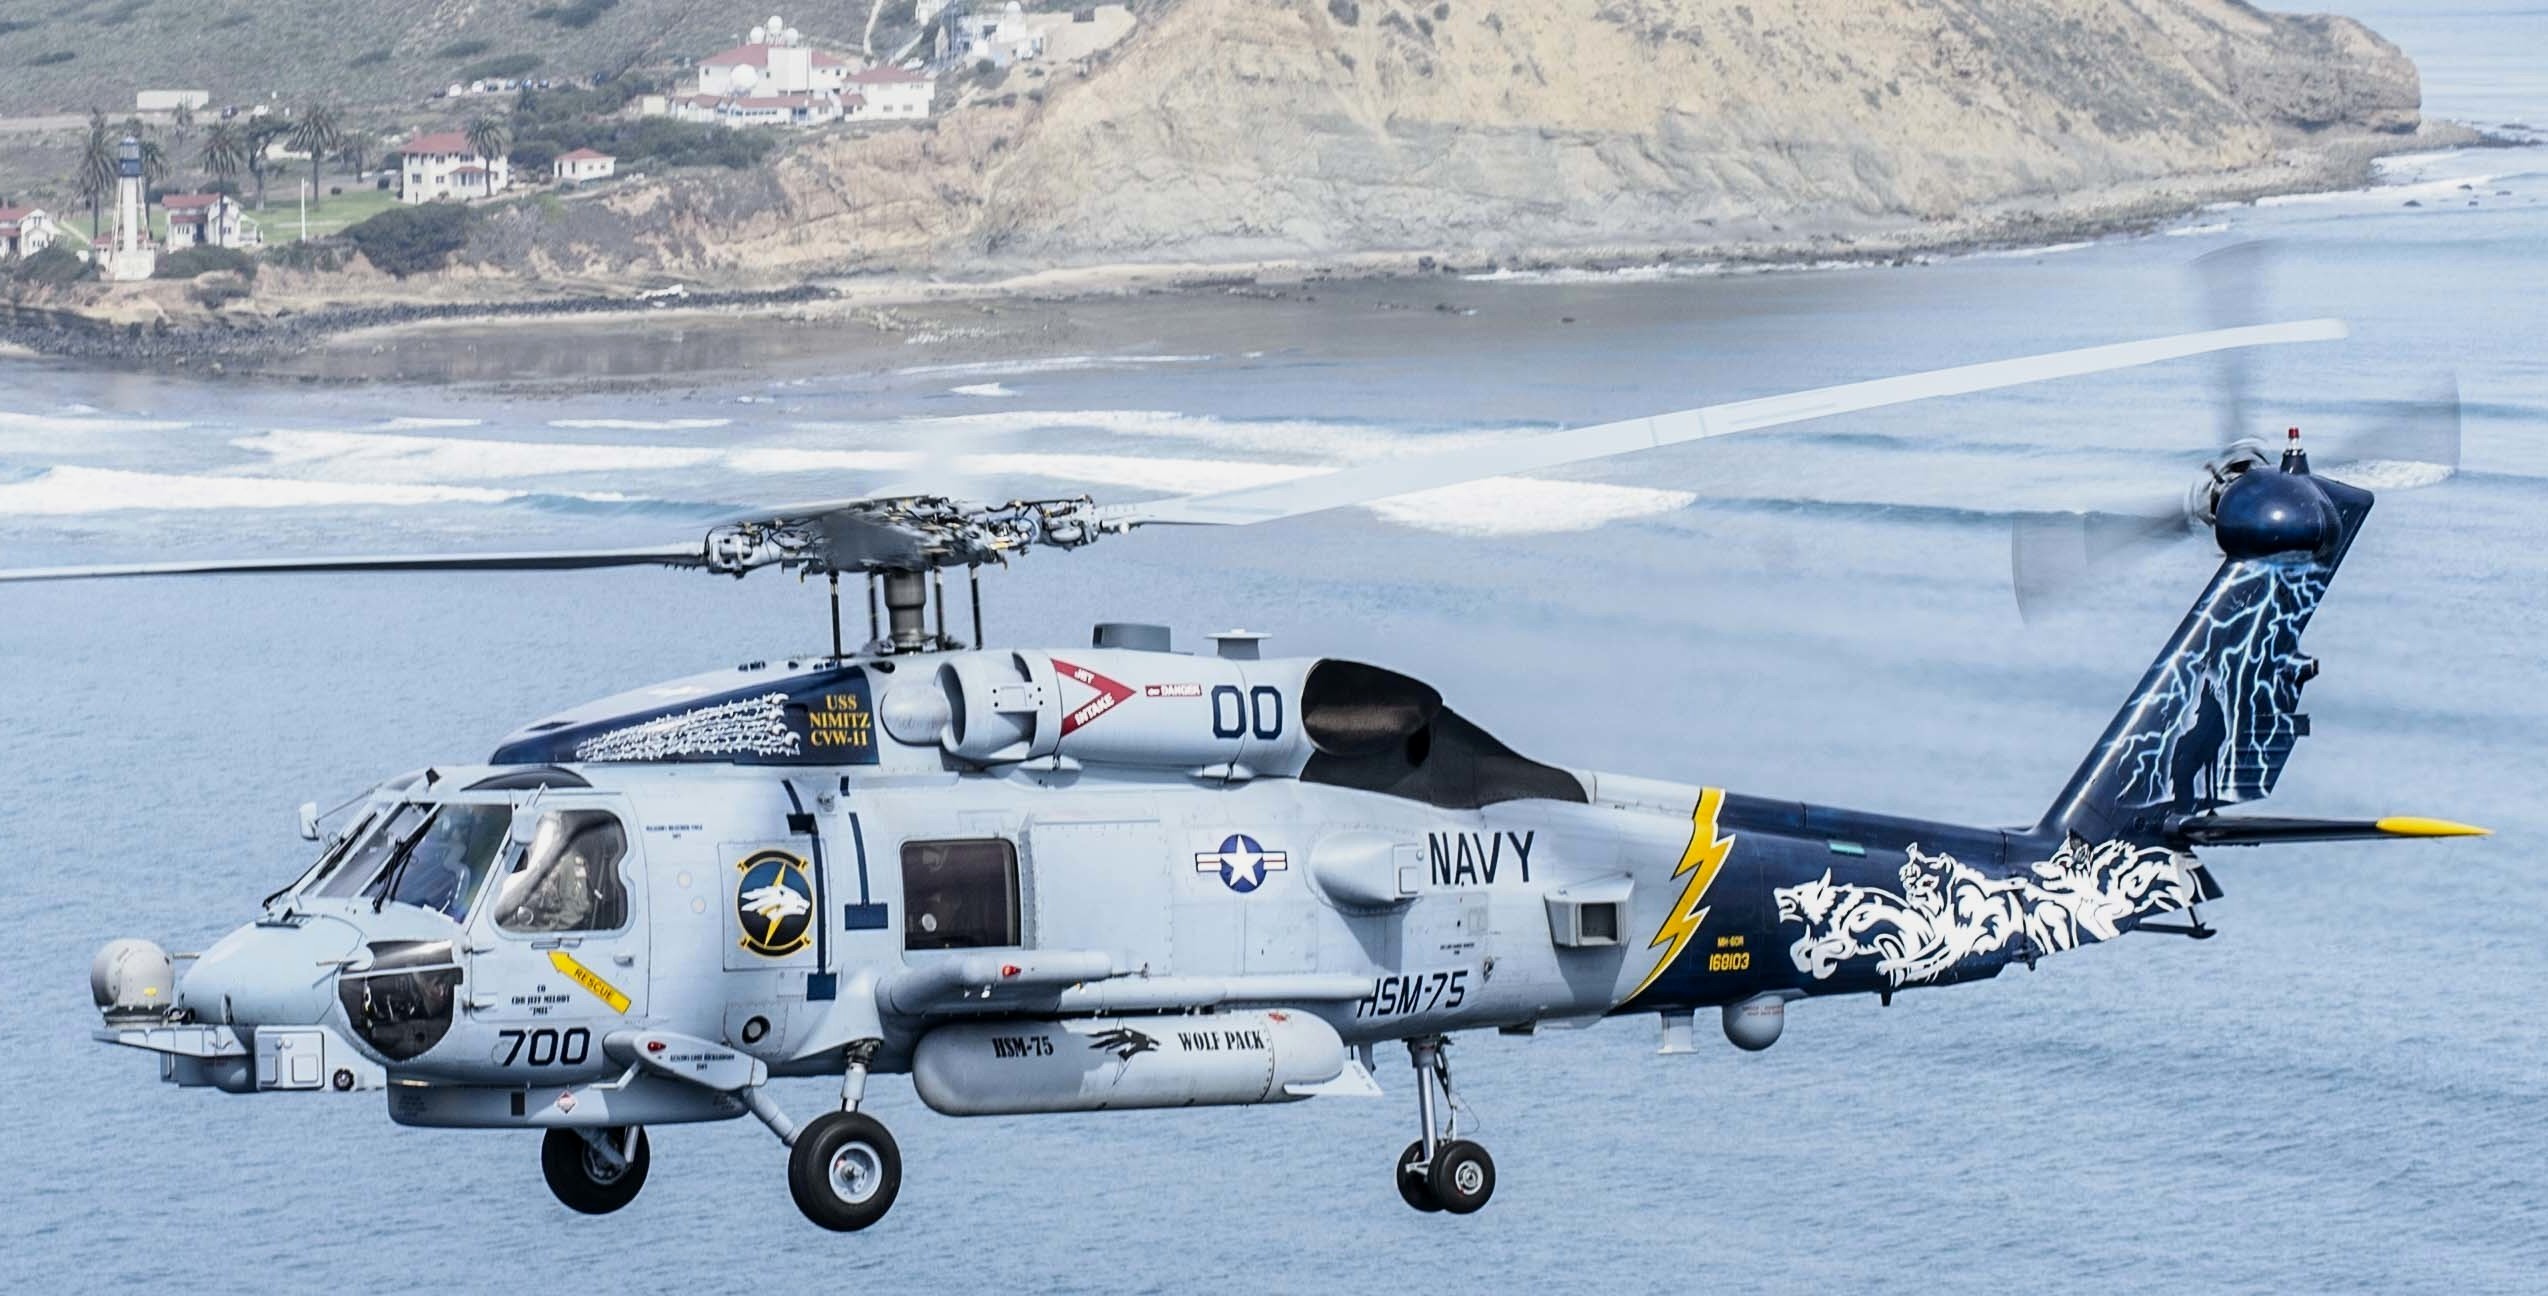 hsm-75 wolfpack helicopter maritime strike squadron us navy mh-60r seahawk 2016 39